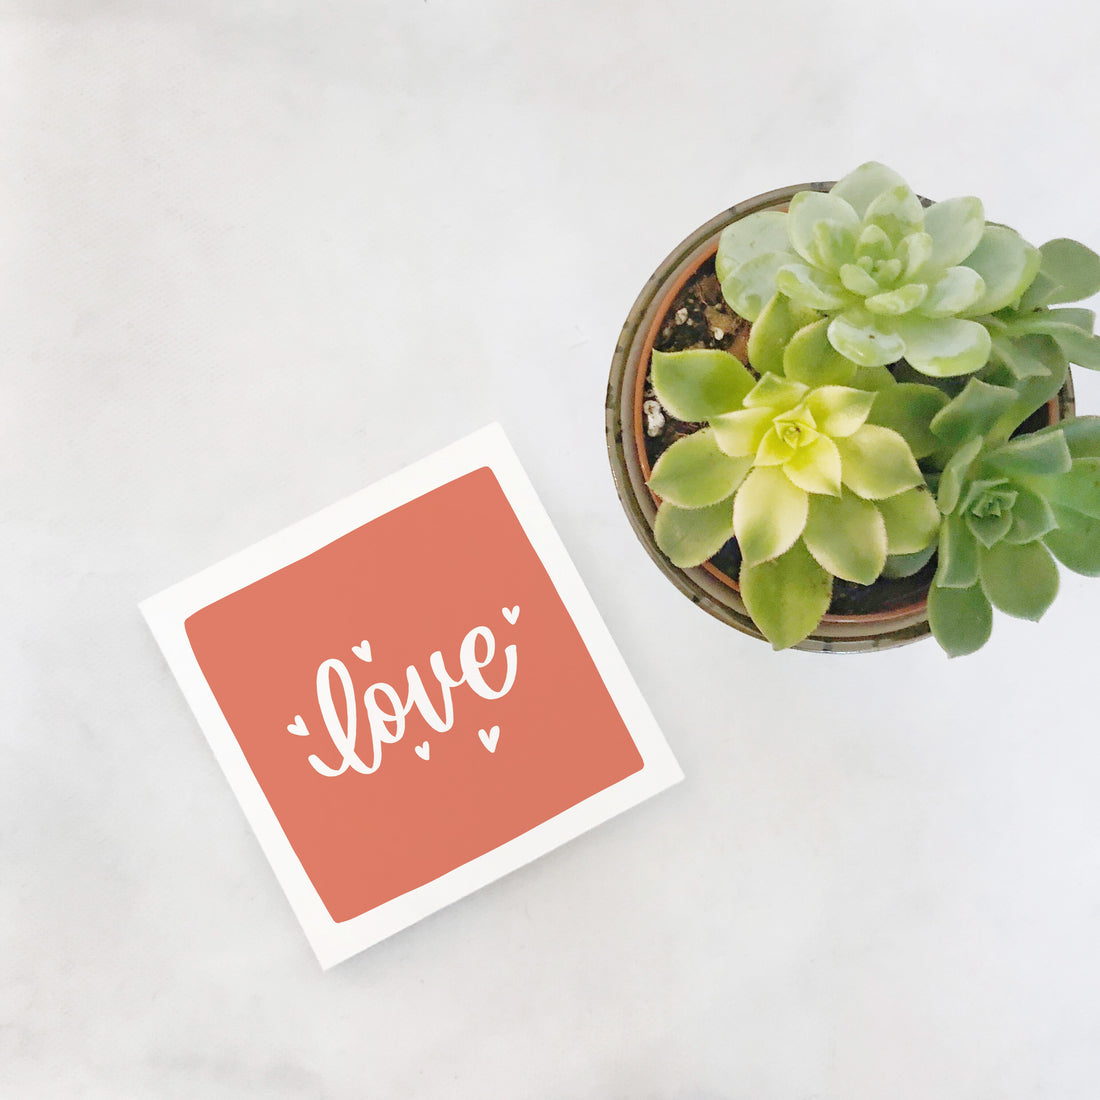 3 Delicate Tender Gifts For Your Valentine/Galentine